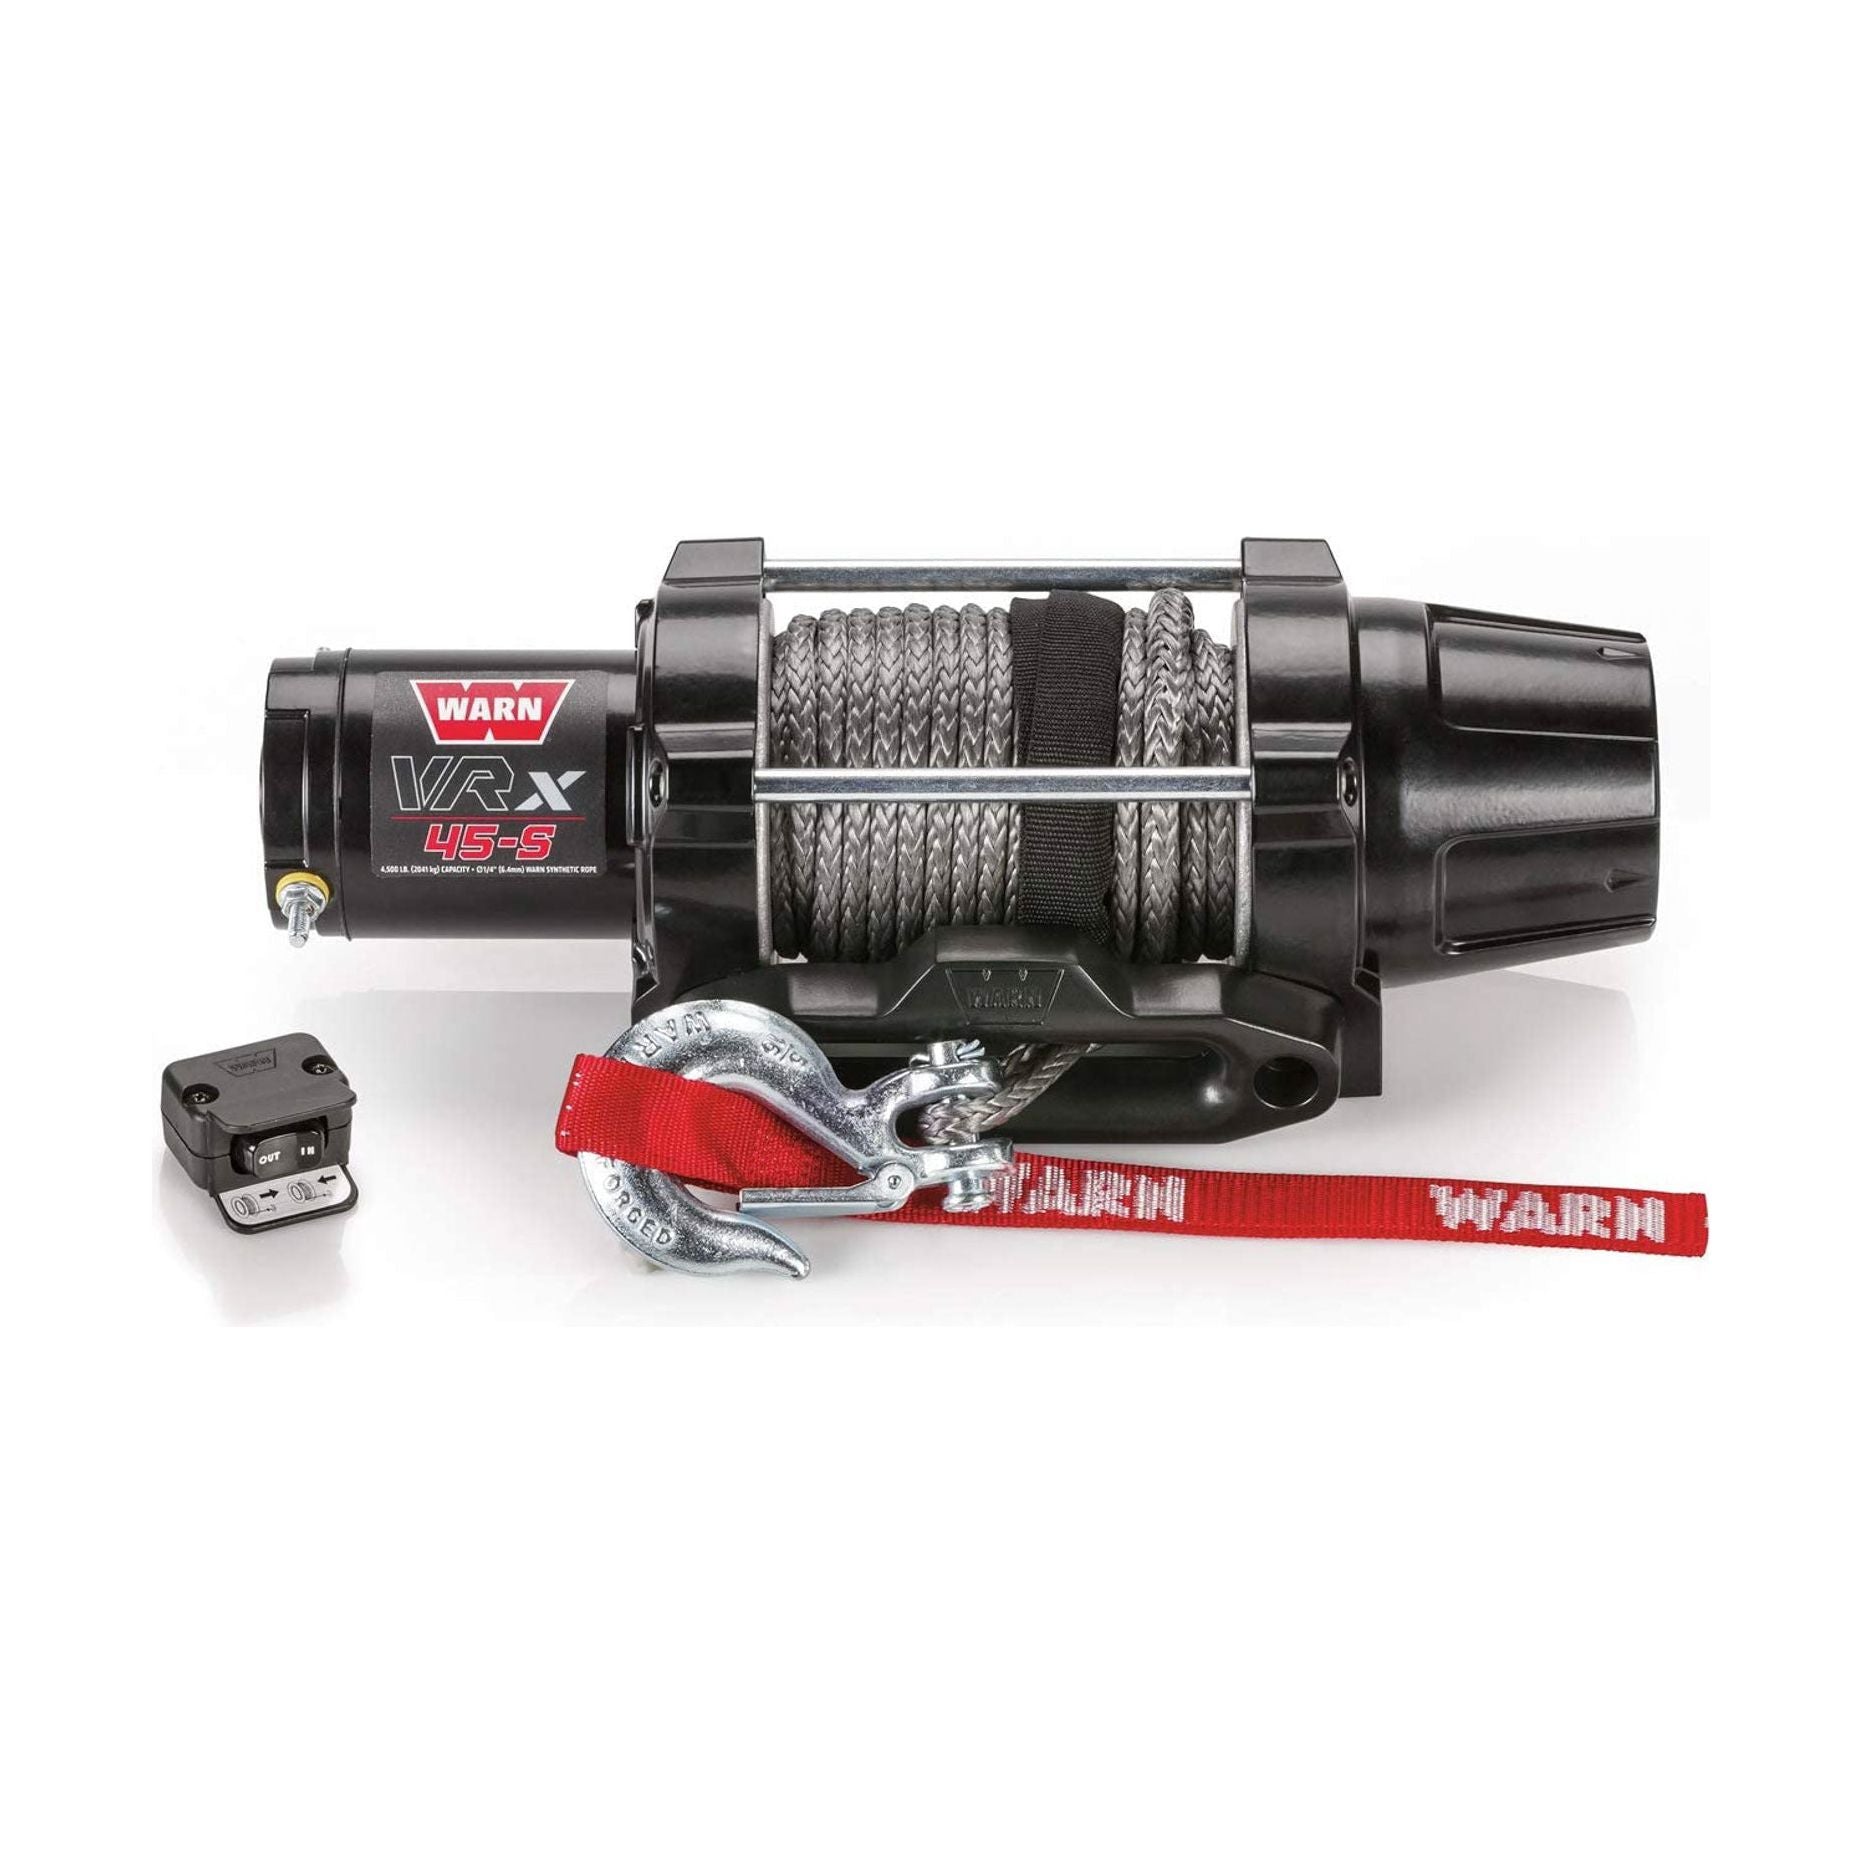 WARN 101040 - VRX 45-S Synthetic Rope Winch